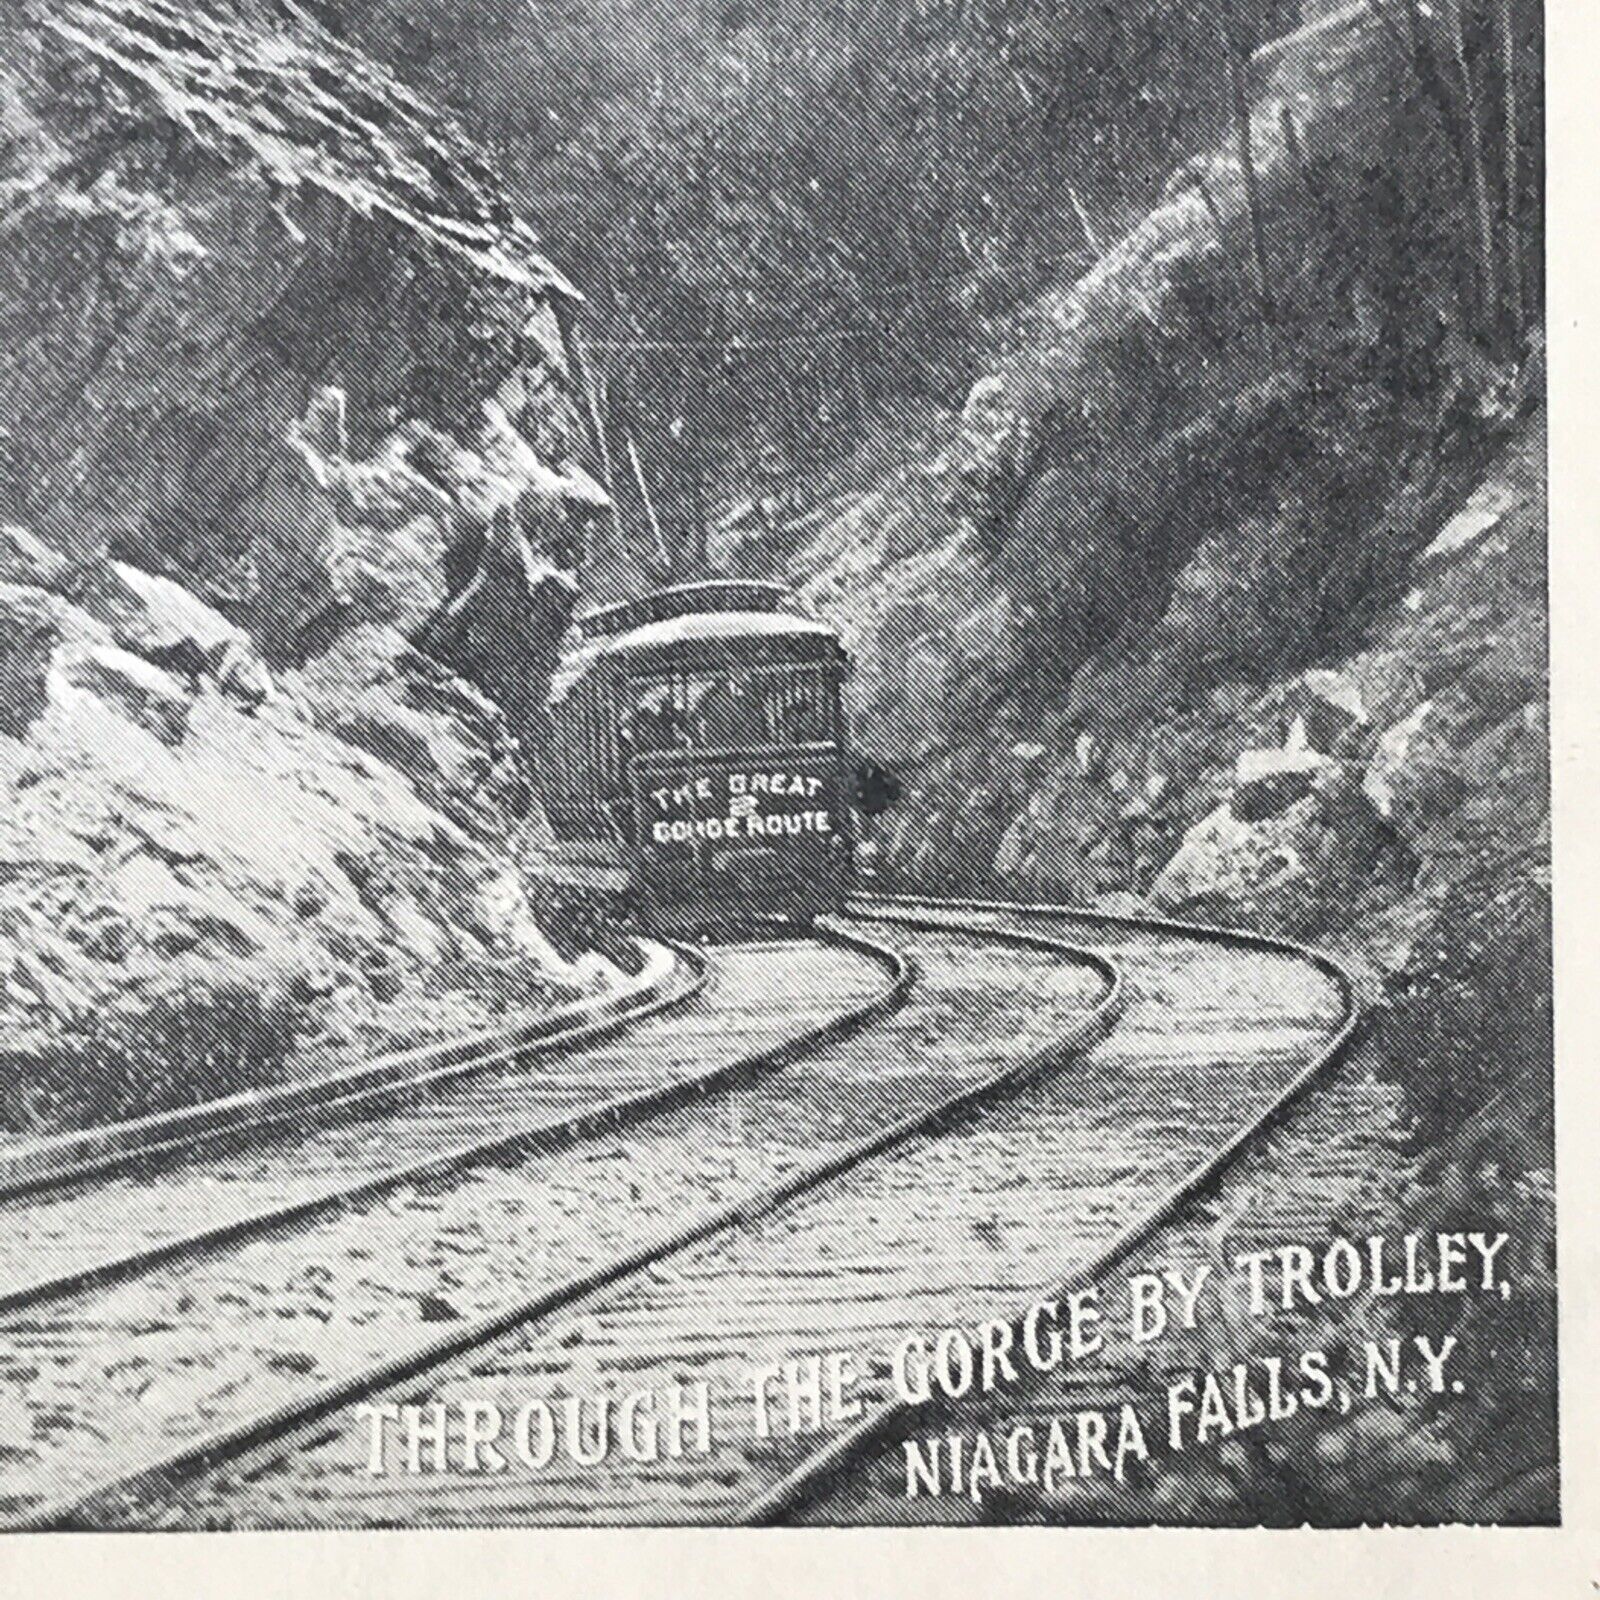 Antique 1900s Great Gorge Route Trolley Line Postcard Niagara Falls NY New York